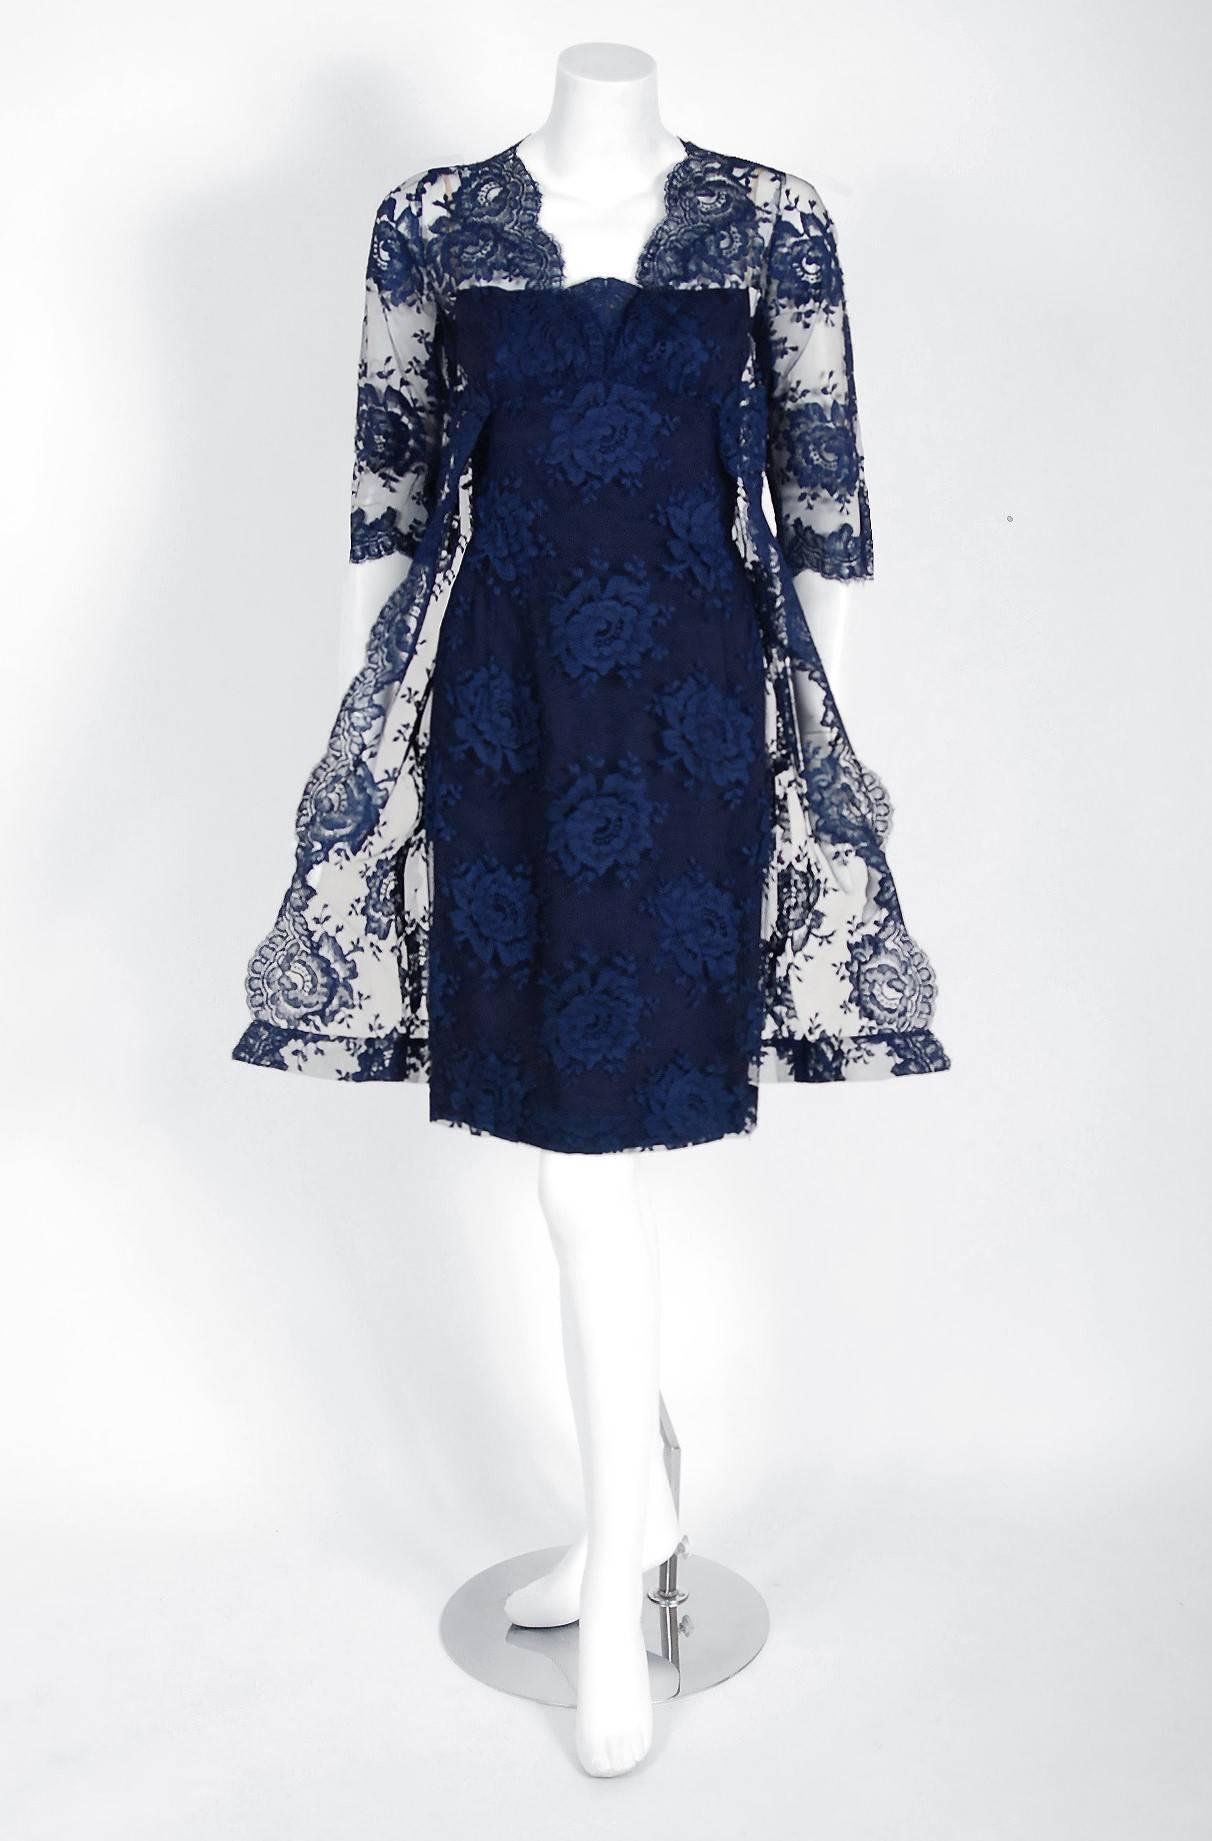 An exceptional Jean Desses demi-couture cocktail dress dating back to the late 1950's. Jean Desses creations are rare, unique and highly collectible. He is one of the most important designers of the 20th century and was a designated Haute Couture